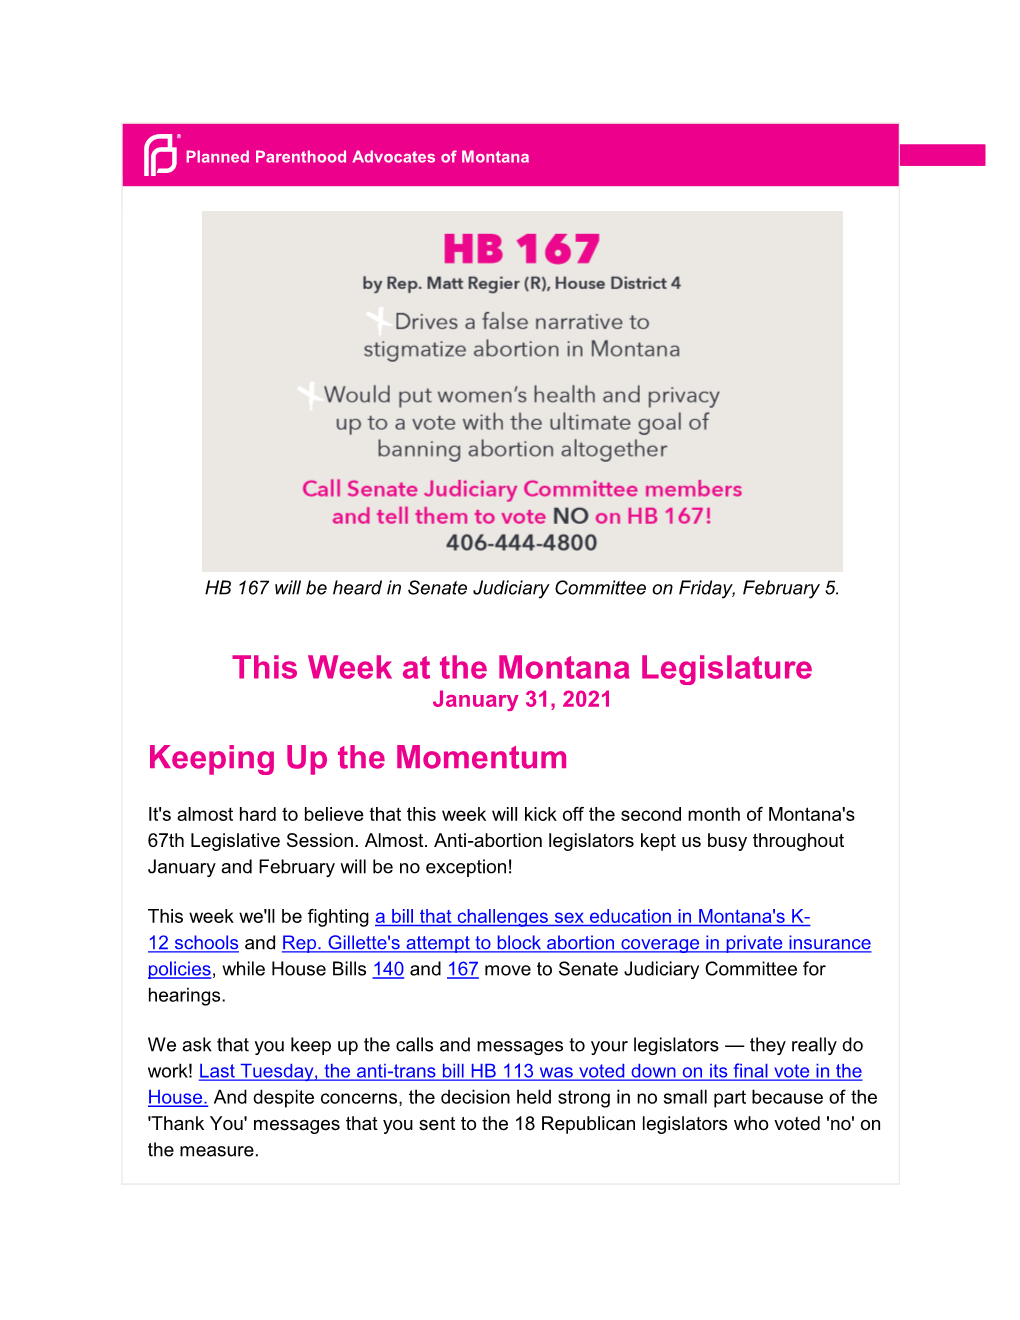 This Week at the Montana Legislature Keeping up the Momentum